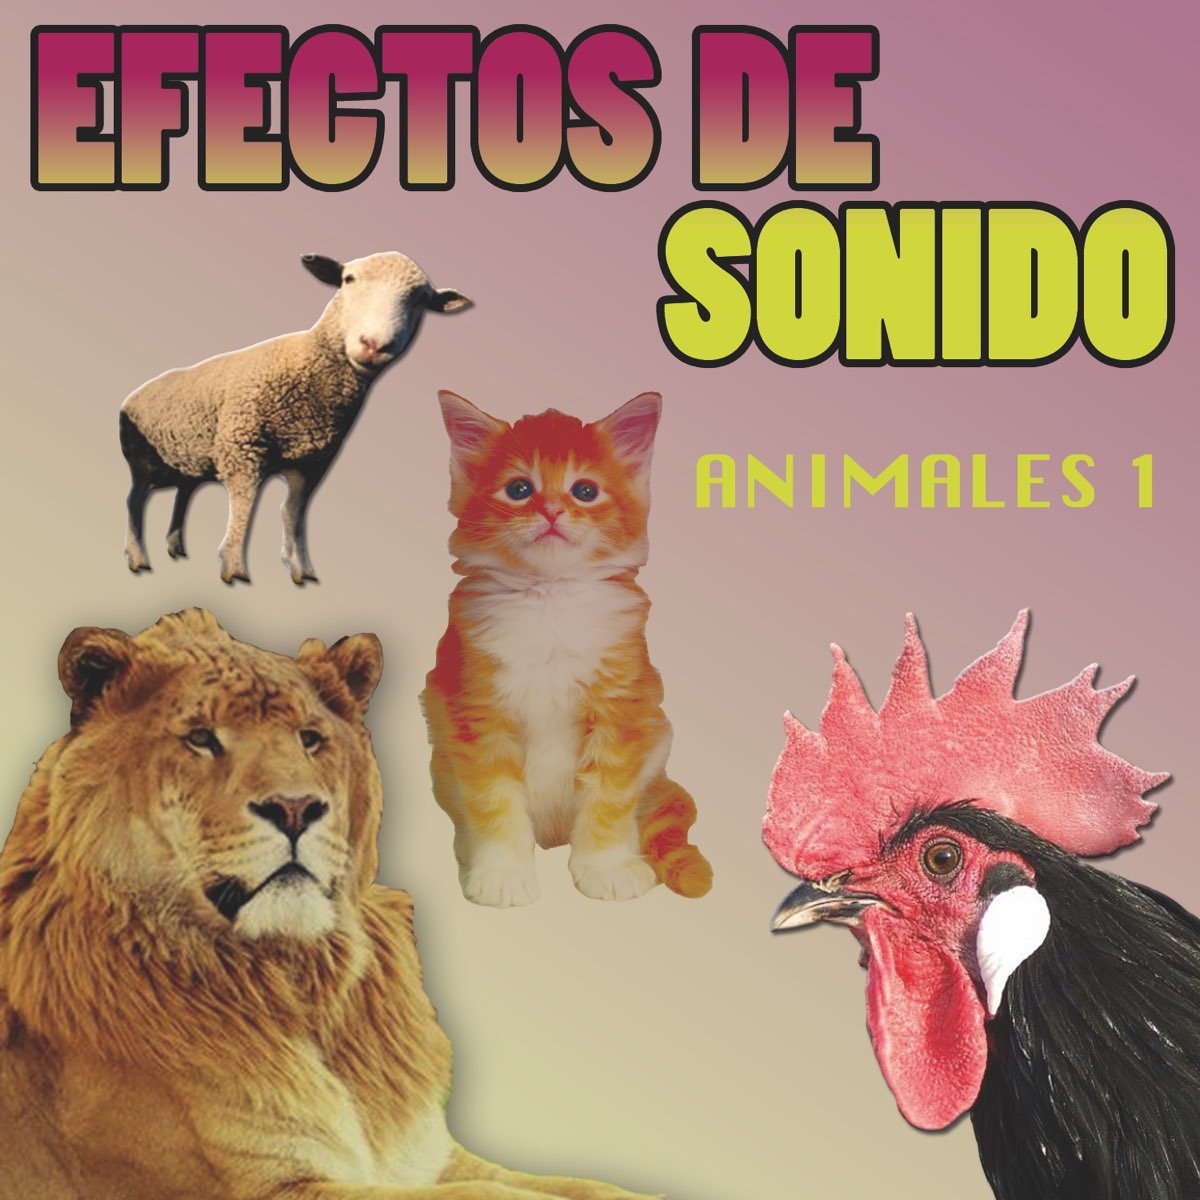 Efectos De Sonido Animales Vol.2 by Effects Sound D.J. on Apple Music